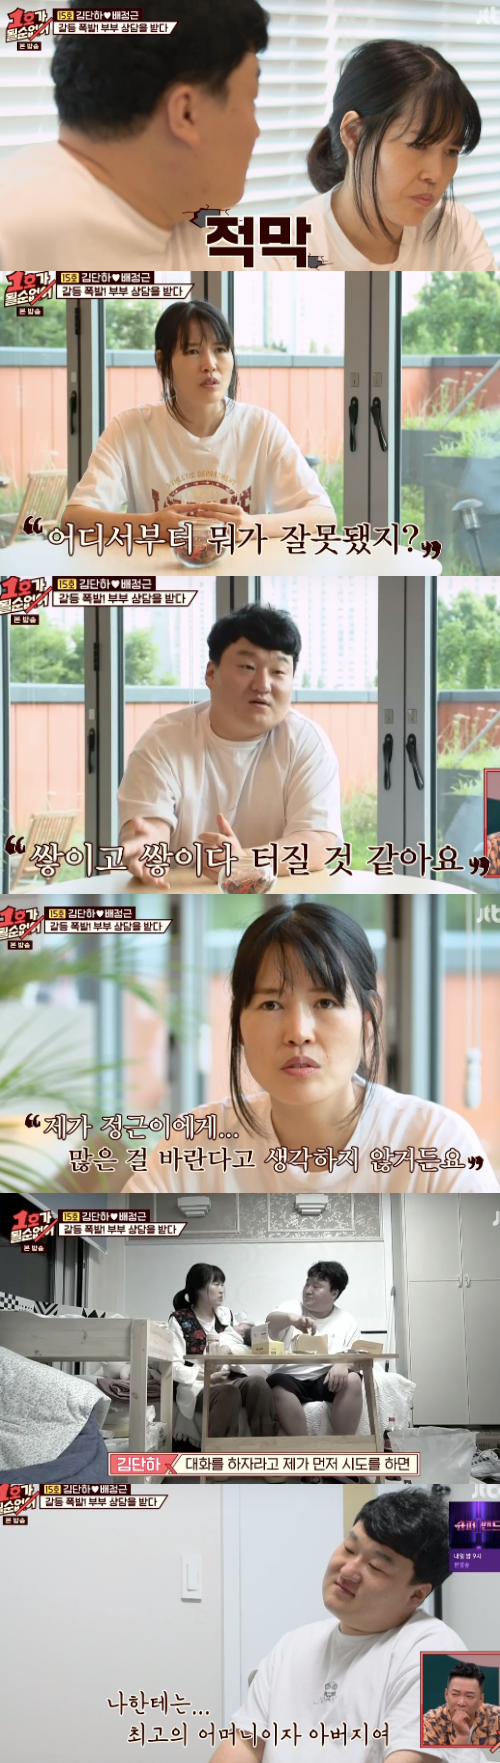 In No.1 I cant be No.1, Kim Dan-ha and Bae Jeong-geun were shown visiting a couples counseling center.JTBCs entertainment No.1 broadcast on the 18th was broadcast on the air.On the same day, the 15th Kim Dan-ha and Bae Jeong-geun came back again. They all welcomed the couple, saying, The couple are short-term.They were pictured.I put it down so much, but I want to put it down so much, I want to build up and build up and not care for me, is this the couple? Kim said.Bae Jung-geun also said, I think it will explode later.Kim Dan-ha asked carefully, Do you think you have a little colder about Jung Geun? Kim Dan-ha said, I think it is colder than the first time. The faith disappeared due to repeated mistakes, and the affection cooled with broken faith.Back on the monitor, Bae Jeong-geun recalled his father and said, How did you live like this?It is not easy to be a father, he said, and he confessed that he was a person who was feeling, saying, I am a Feeling person. It was time to get out the hidden inside.They decided to play the role of a couple and understand each others positions.Kim Dan-ha said, I felt sorry for feeling each others Feeling. Tears and Bae Jung-geun also took a step closer, saying, Lets hold on, a good day will come.Paeng Hyon Sook, Choi Yang-Rak couple headed for Im misuk, Kim Hak-rae homePaeng Hyon Sook said, Is not it like sharing and Hyun Bin? And Im misuk responded, Won Bin came to me, it was cute.Turns out Im misuk worked with Pyeong Hyun Sook to join Choi Yang-Rak as a mother group.Paeng Hyon Sook said, Choi Yang-Rak is out of the middle and the top of his head, but he insists that he is not himself.Kim Hak-rae left his luxury Porsche car to Choi Yang-Rak. Kim Hak-rae showed a flex saying, Its 200 million if you break it.The four people arrived at the hair transplant center.60 The first betrayal of my life, but I was caught again by three people. Choi Yang-Rak was angry at the betrayal, saying, I did it well. Im Misuk said, I am incised but I can not do my head.I can not be No. 1 captures the broadcast screen